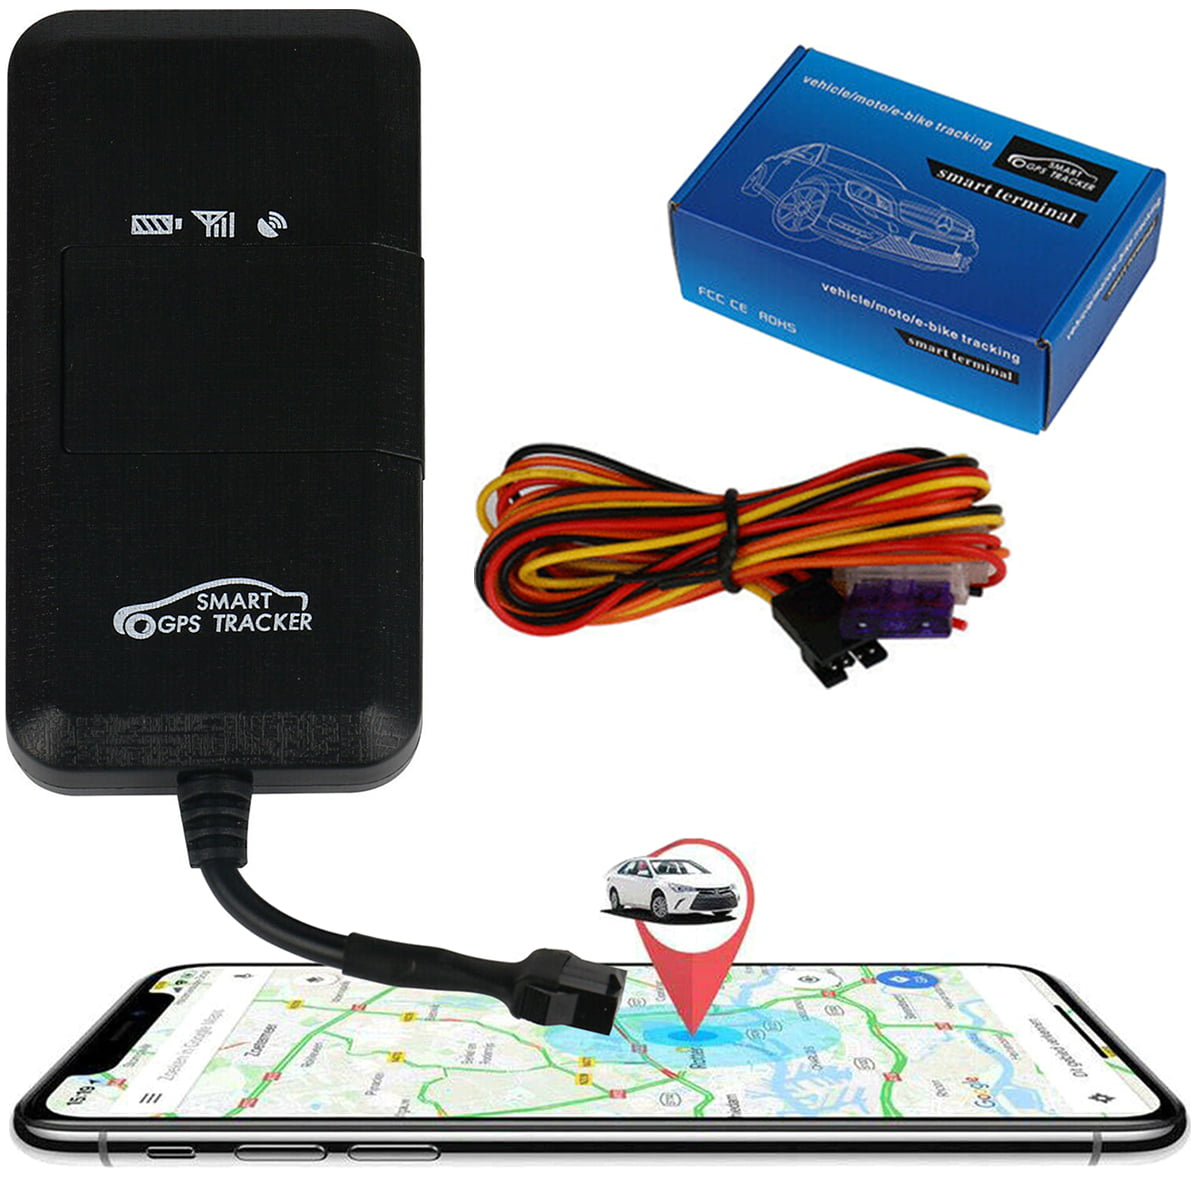 Creyente estudiante universitario Aclarar 4G LTE GPS Tracking Device,Real-Time GPS Anti Theft Alarm Tracker Vehicle  Movement Overspeed Tracking Accurate GPS Locator for Vehicle Cars -  Walmart.com